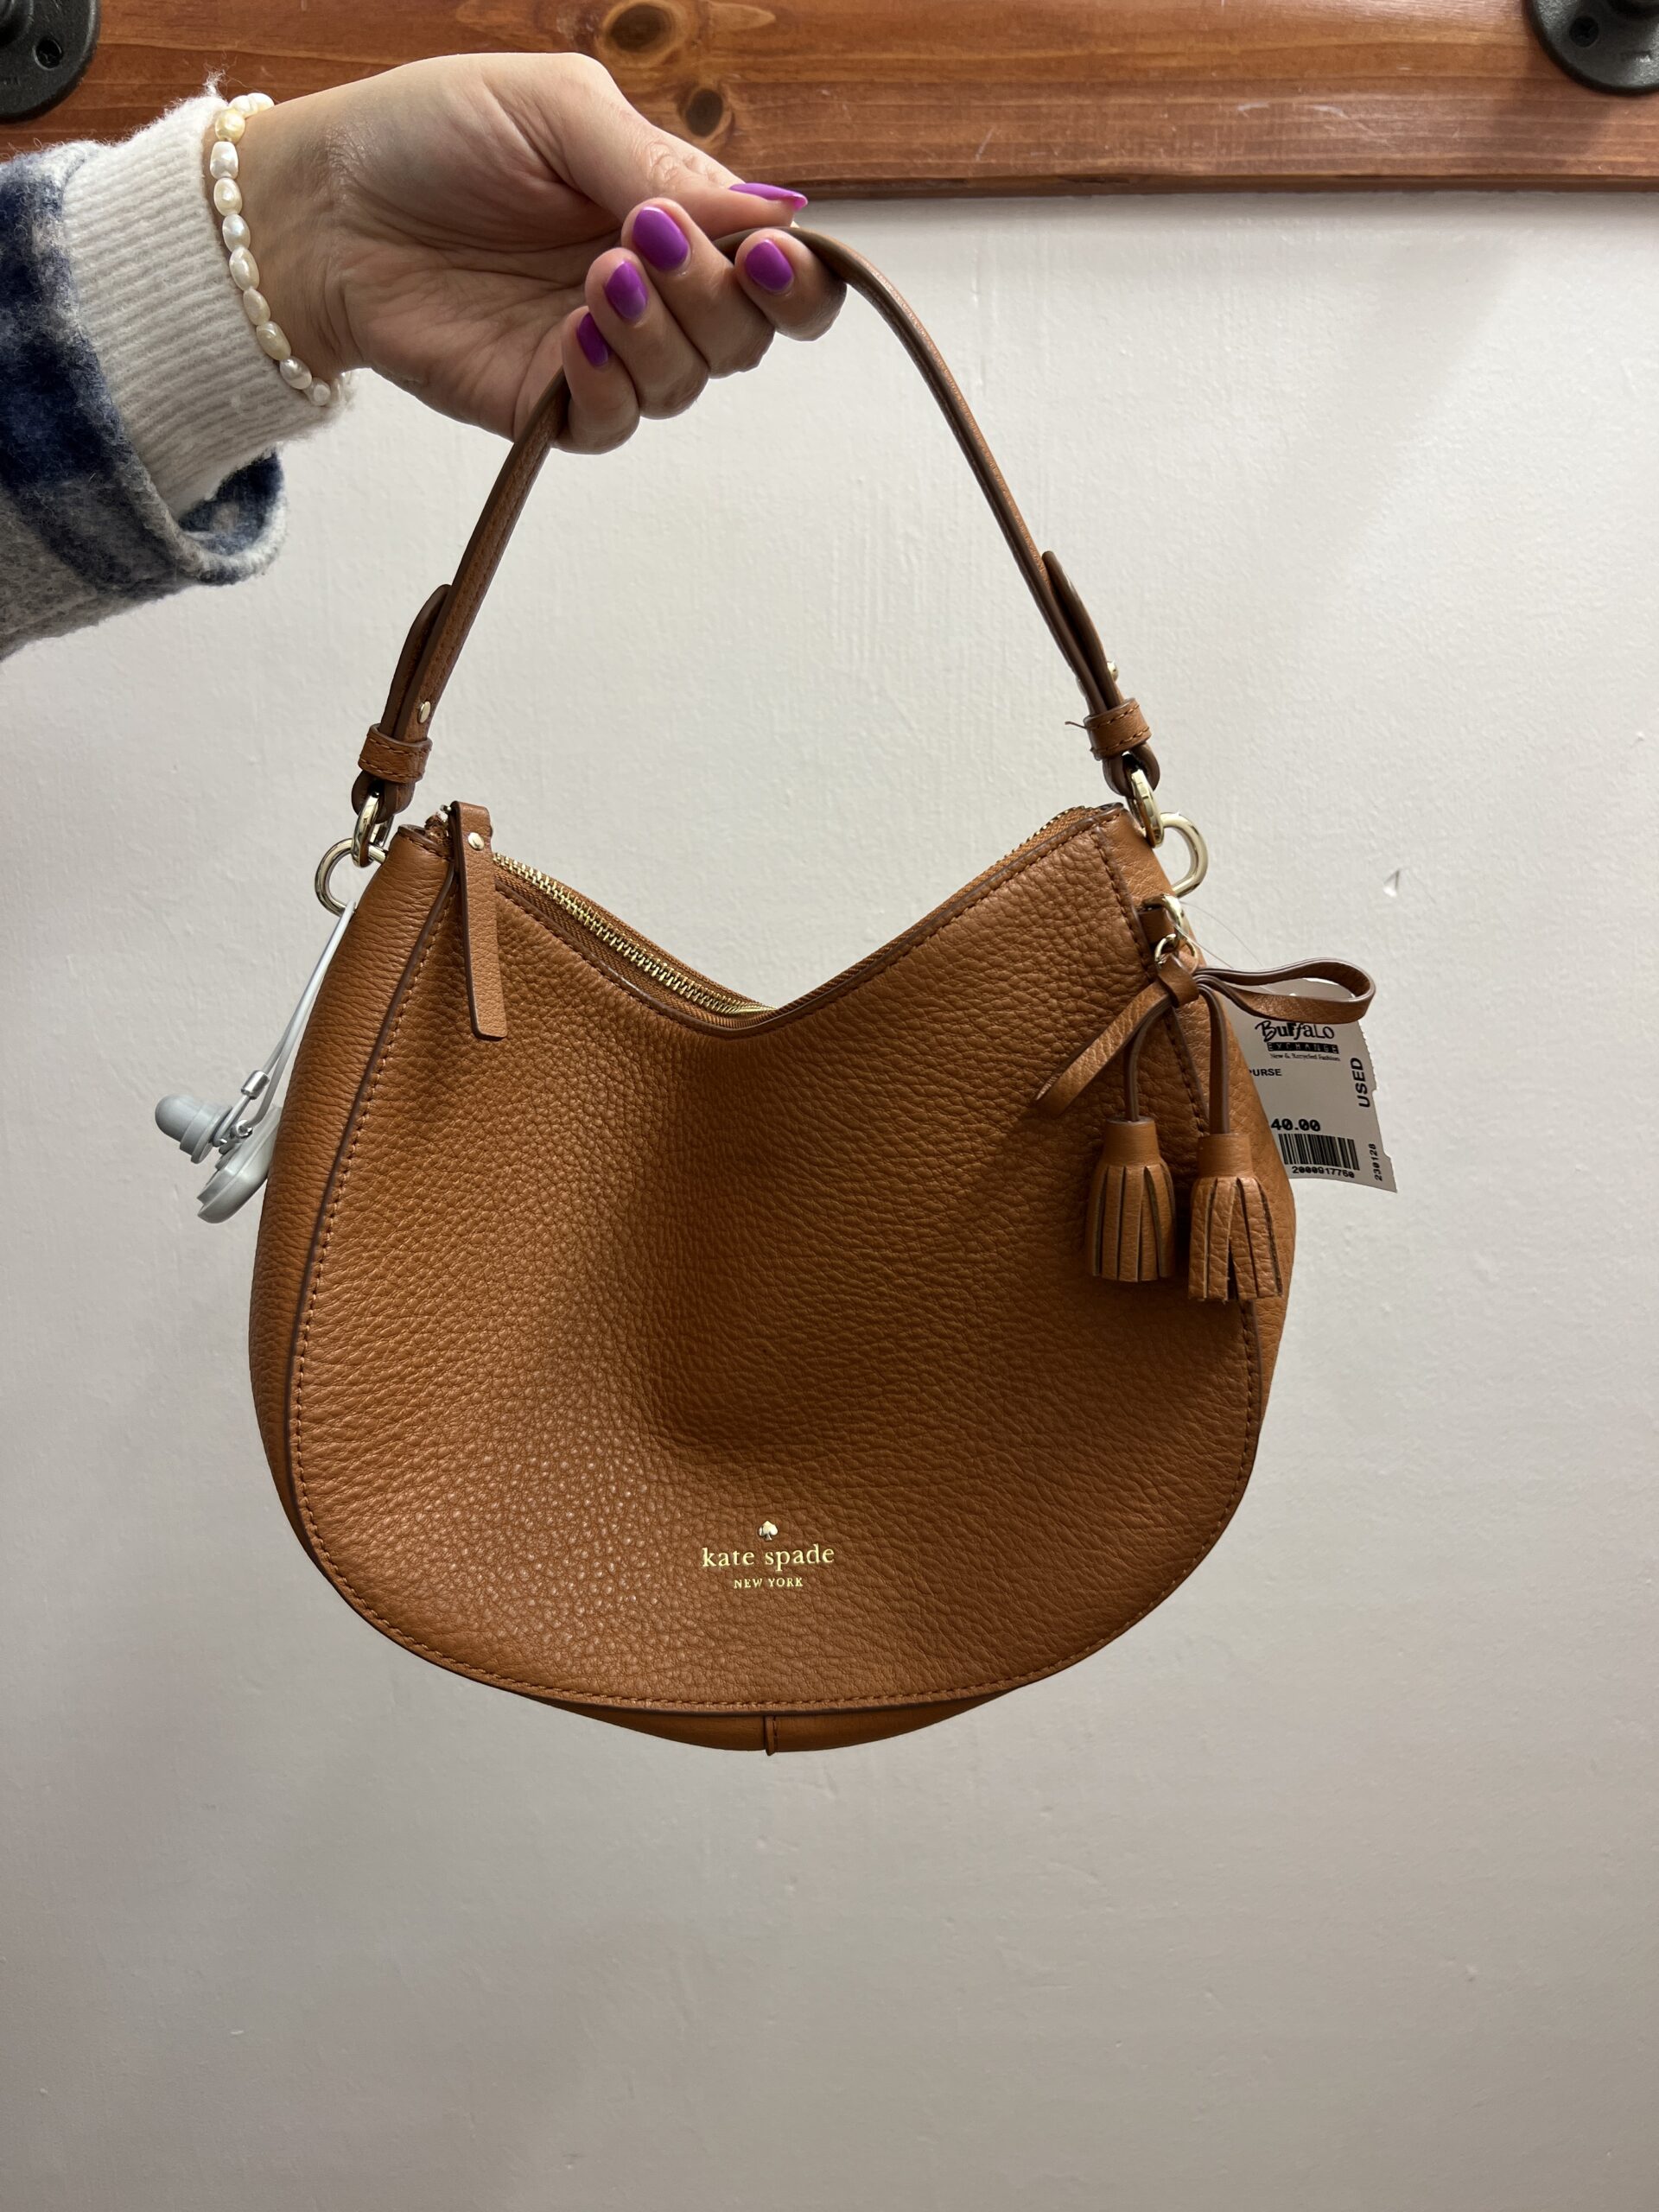 Close up of a hand holding a brown leather Kate Spade shoulder bag